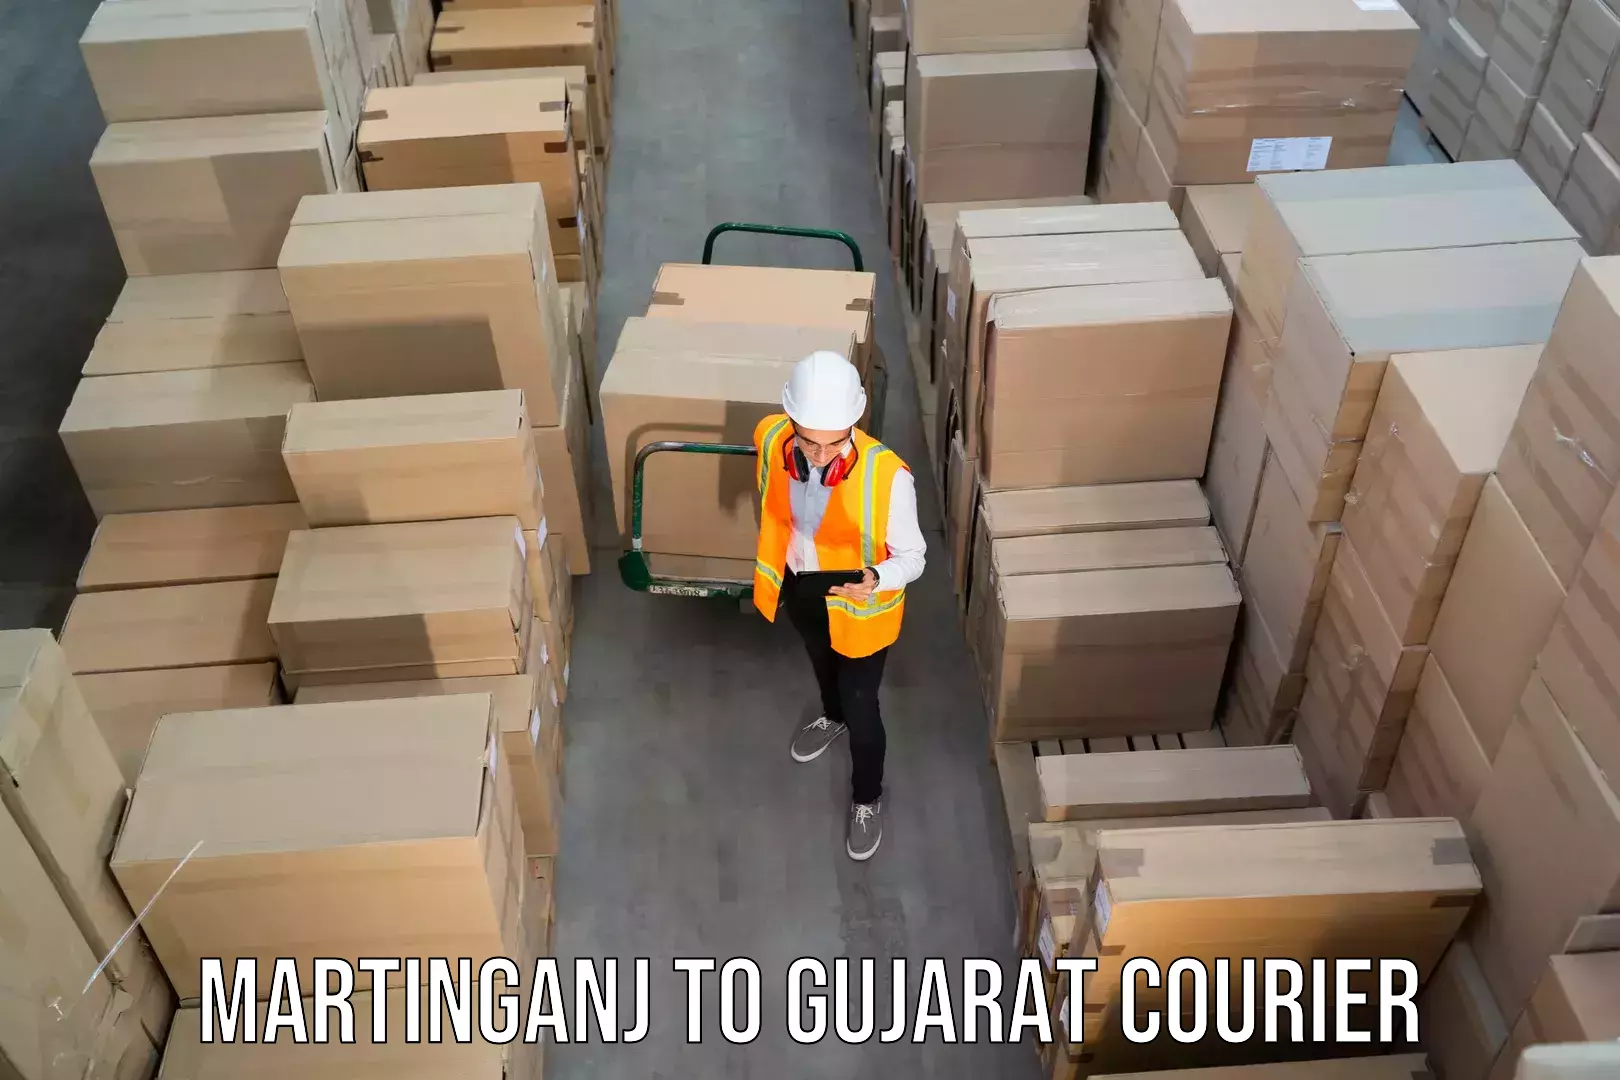 Quality courier services in Martinganj to Morbi